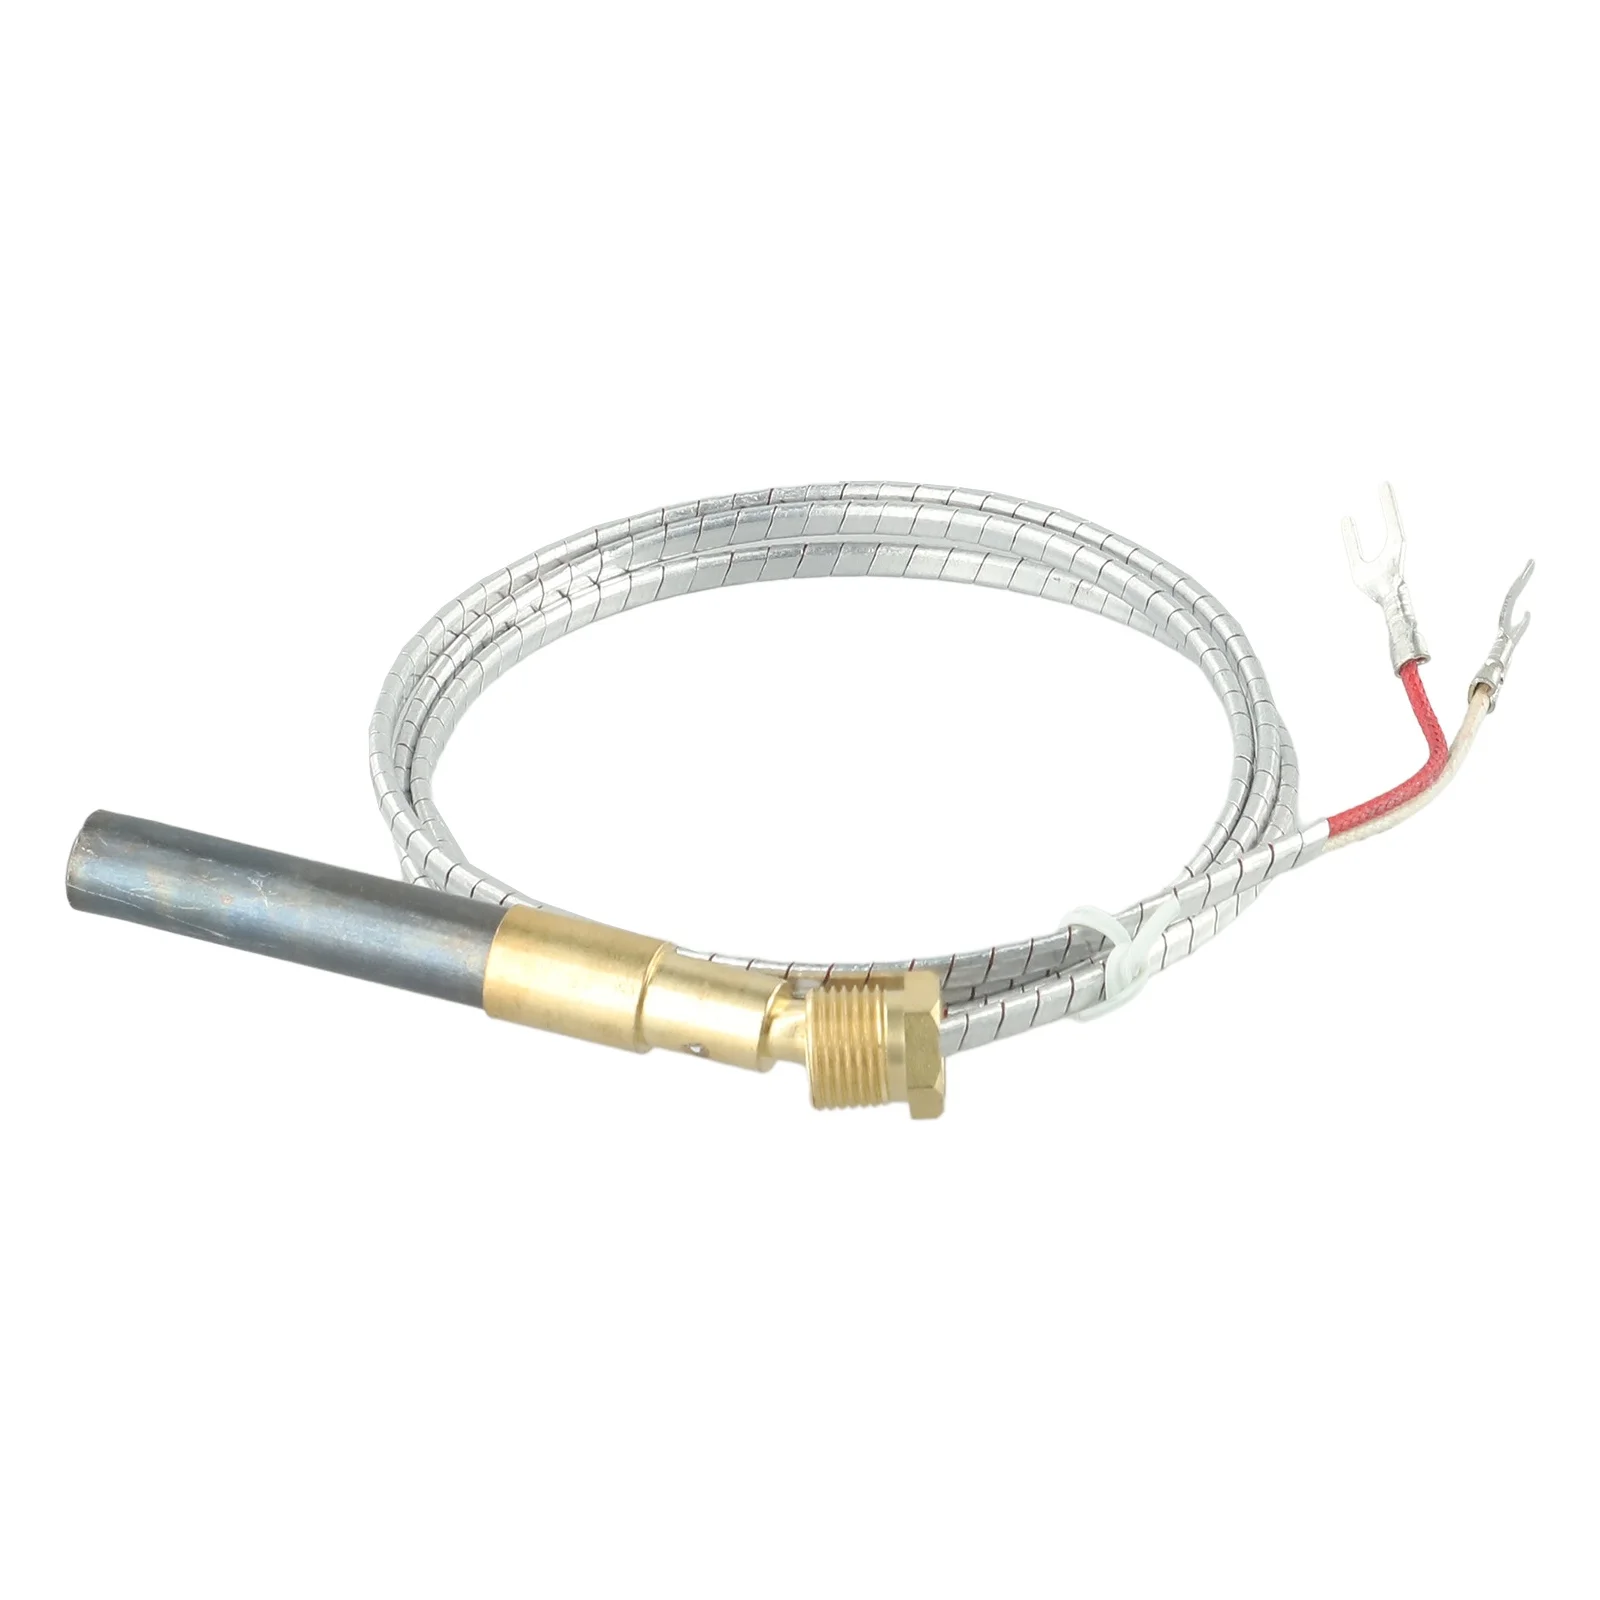 

Thermocouple Thermopile Thermopile Fireplaces Gas Fireplace Hot Water Heater Pilot Generator Sensor Thermopile Durable New